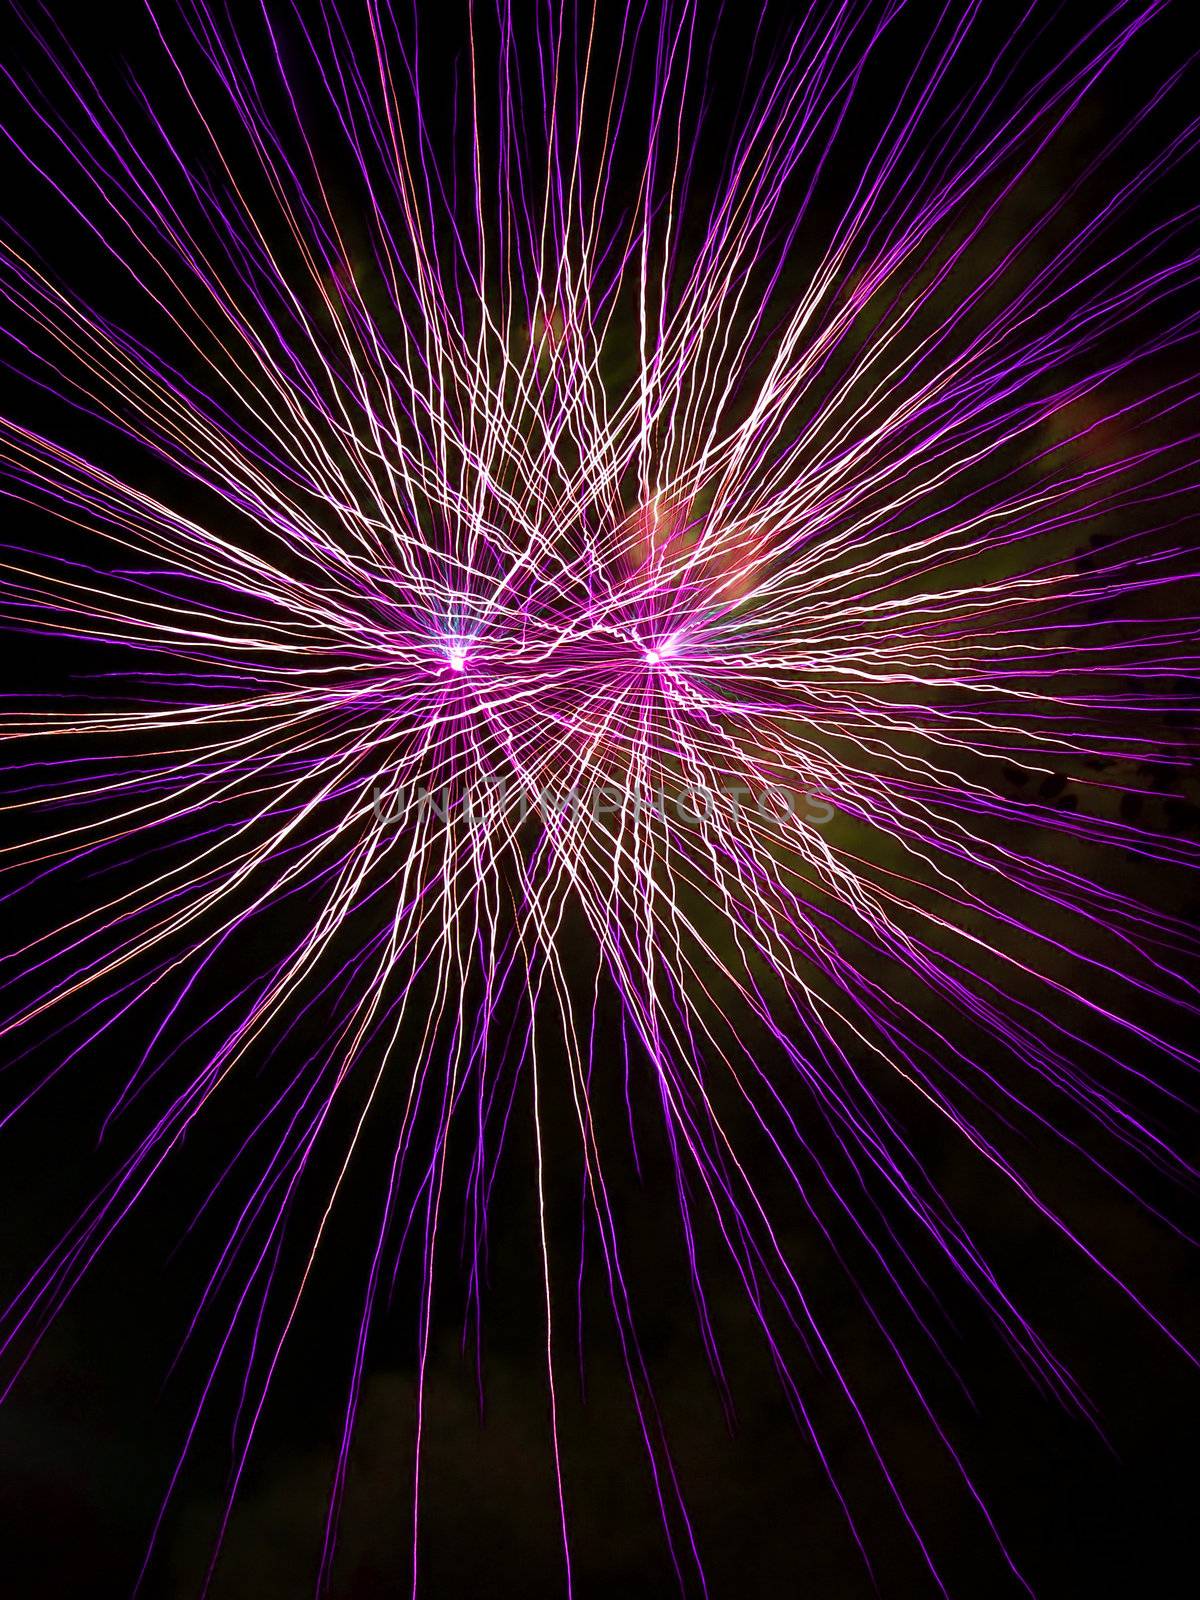 Long Exposure of Pink Fireworks Against a Black Sky